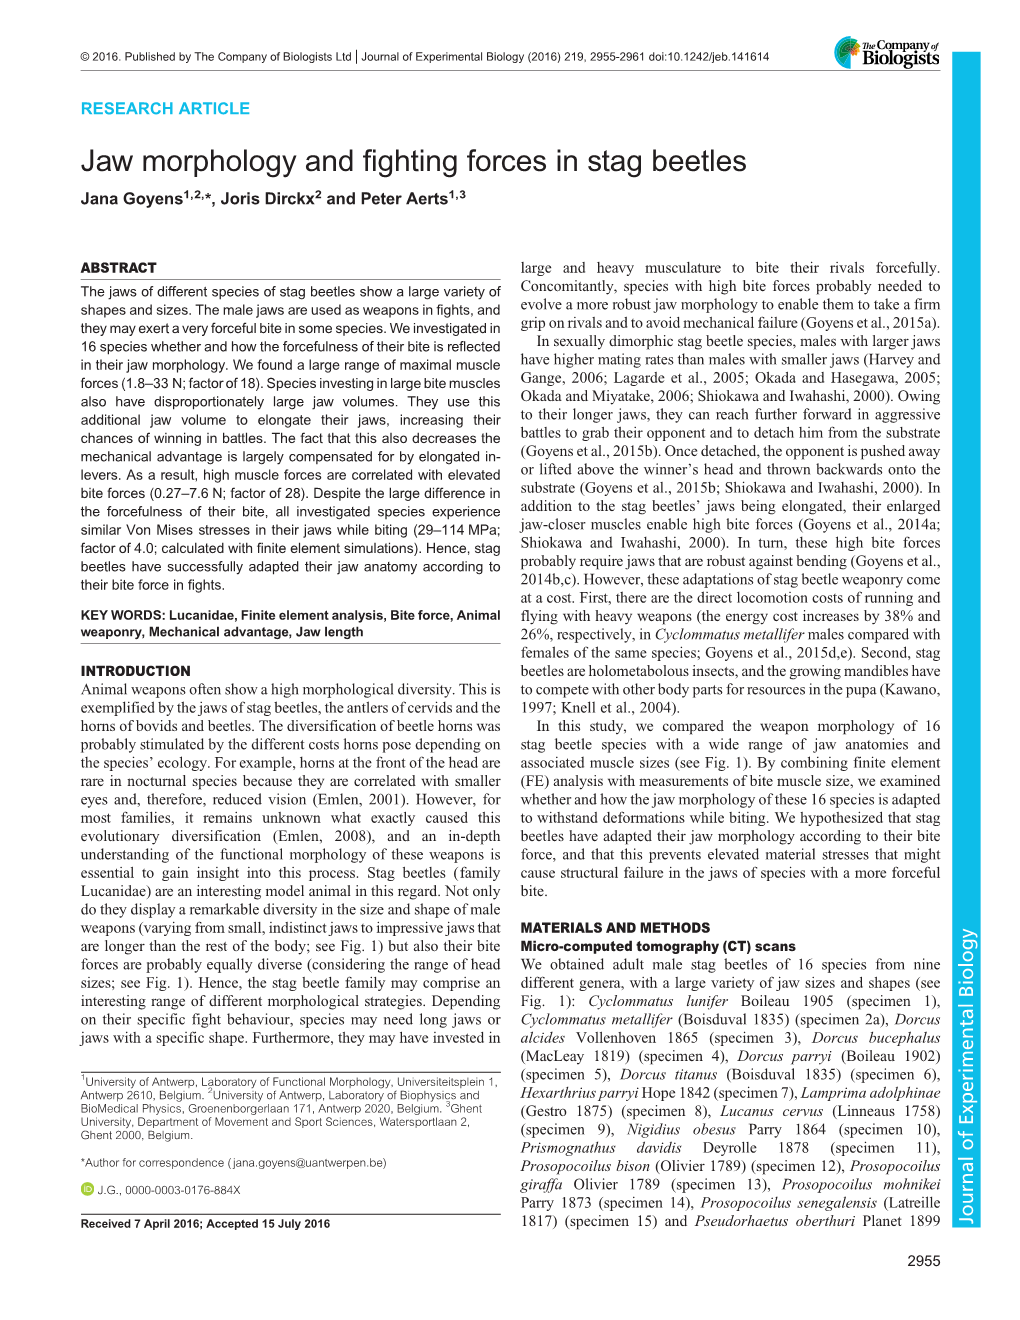 Jaw Morphology and Fighting Forces in Stag Beetles Jana Goyens1,2,*, Joris Dirckx2 and Peter Aerts1,3